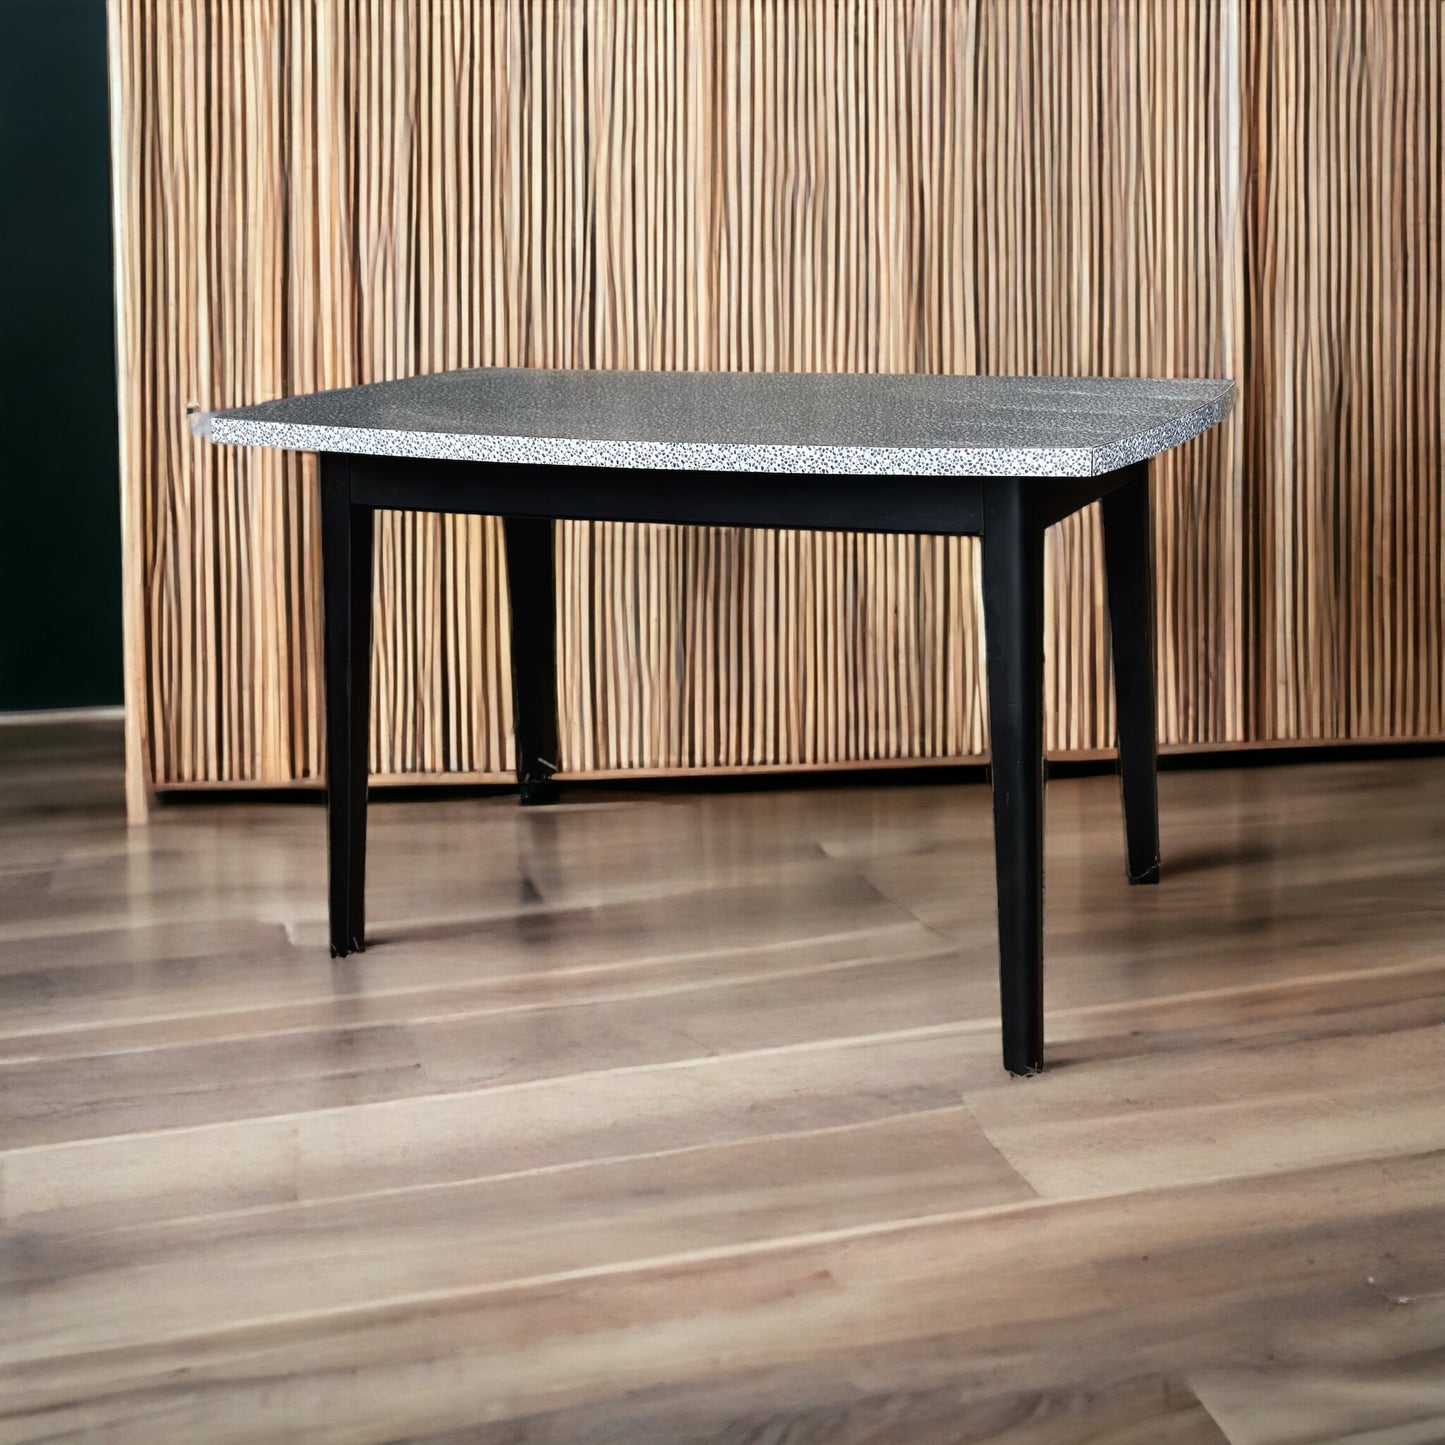 Modernist Wood and Formica Dining Table 1950s Geometric Black and White Pattern